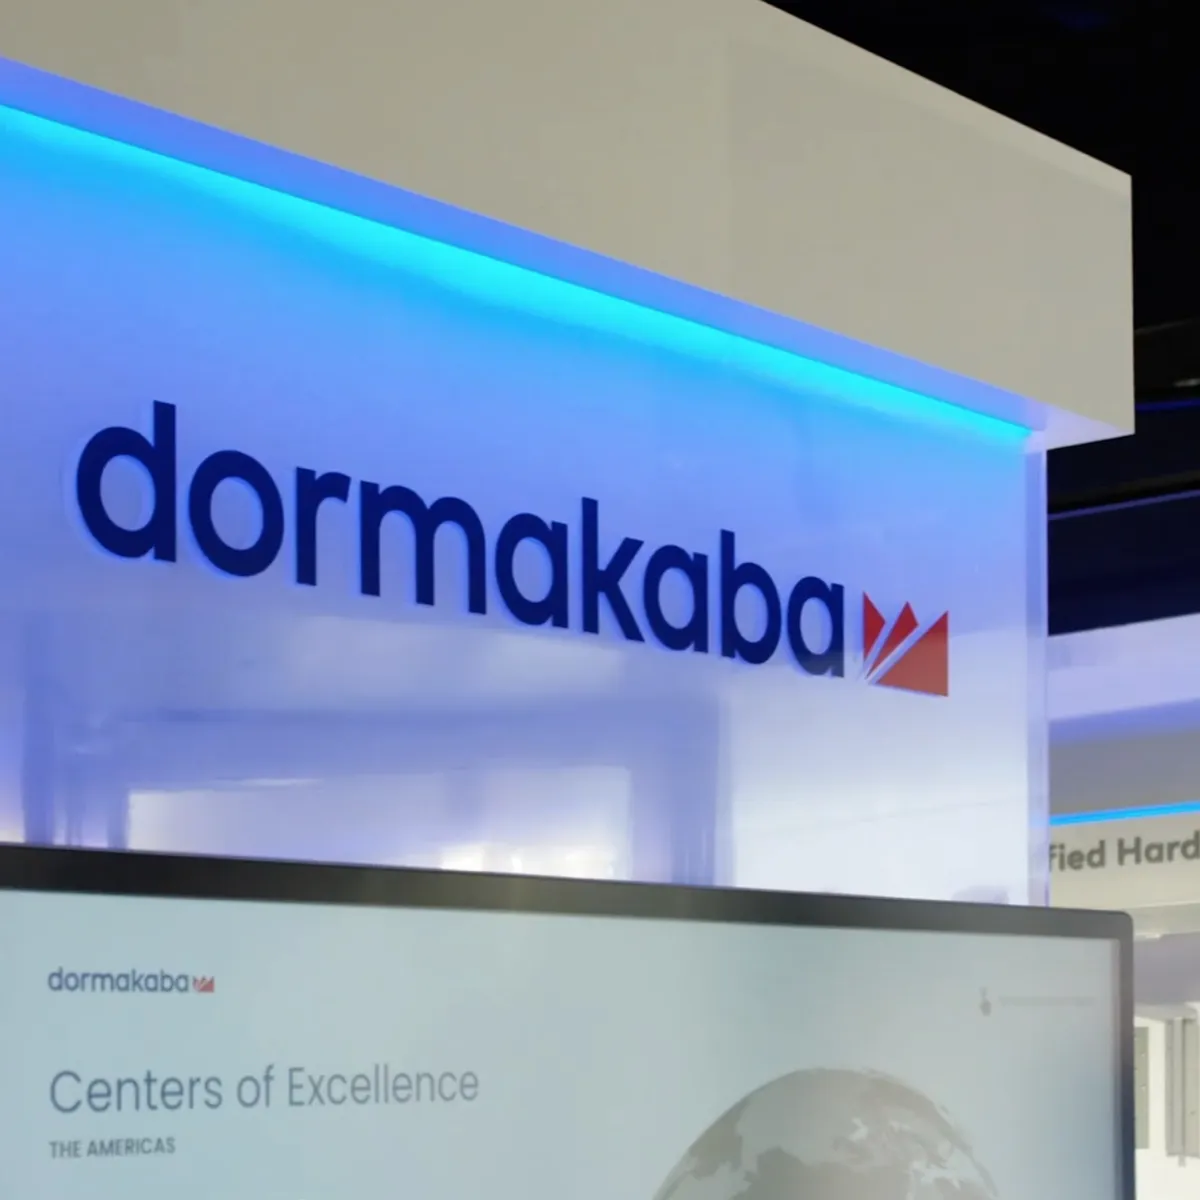 dormakaba Discovery Center logo sign with lighting